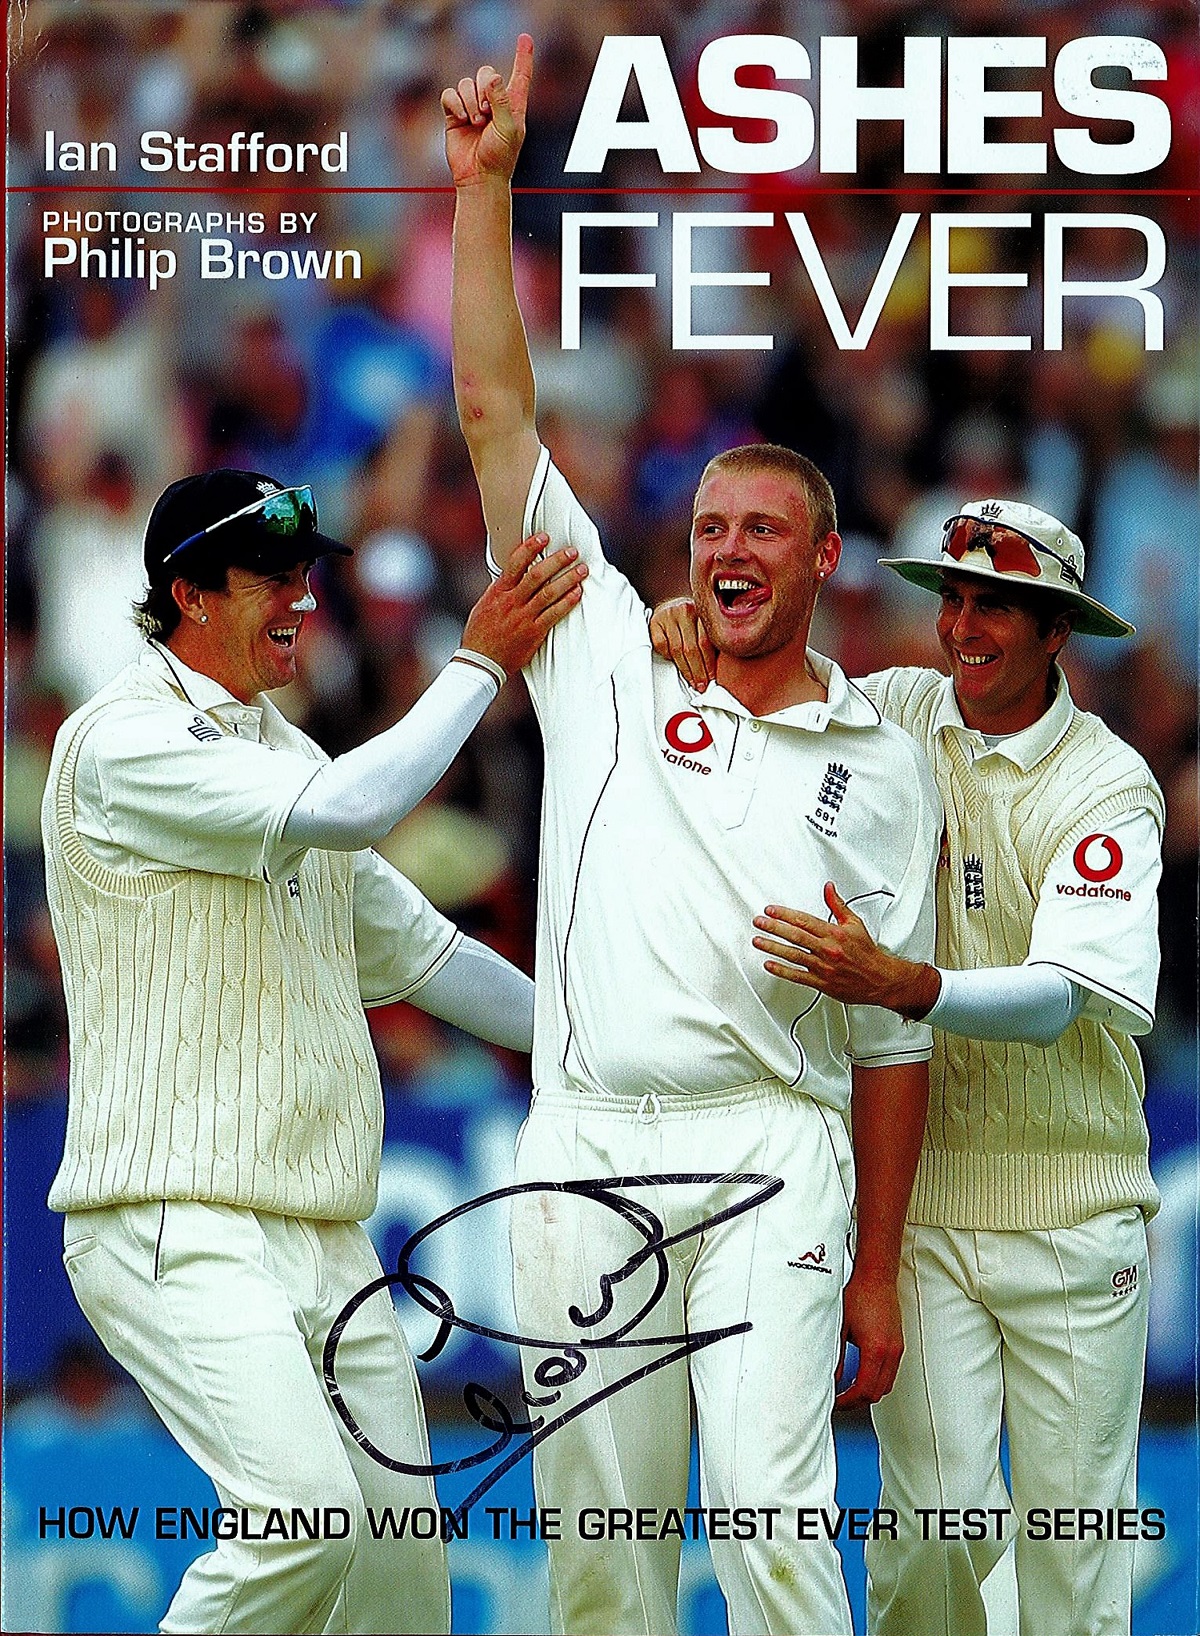 Signed Book Andrew Flintoff Ashes Fever by Ian Stafford First Edition 2005 Hardback Book Signed by